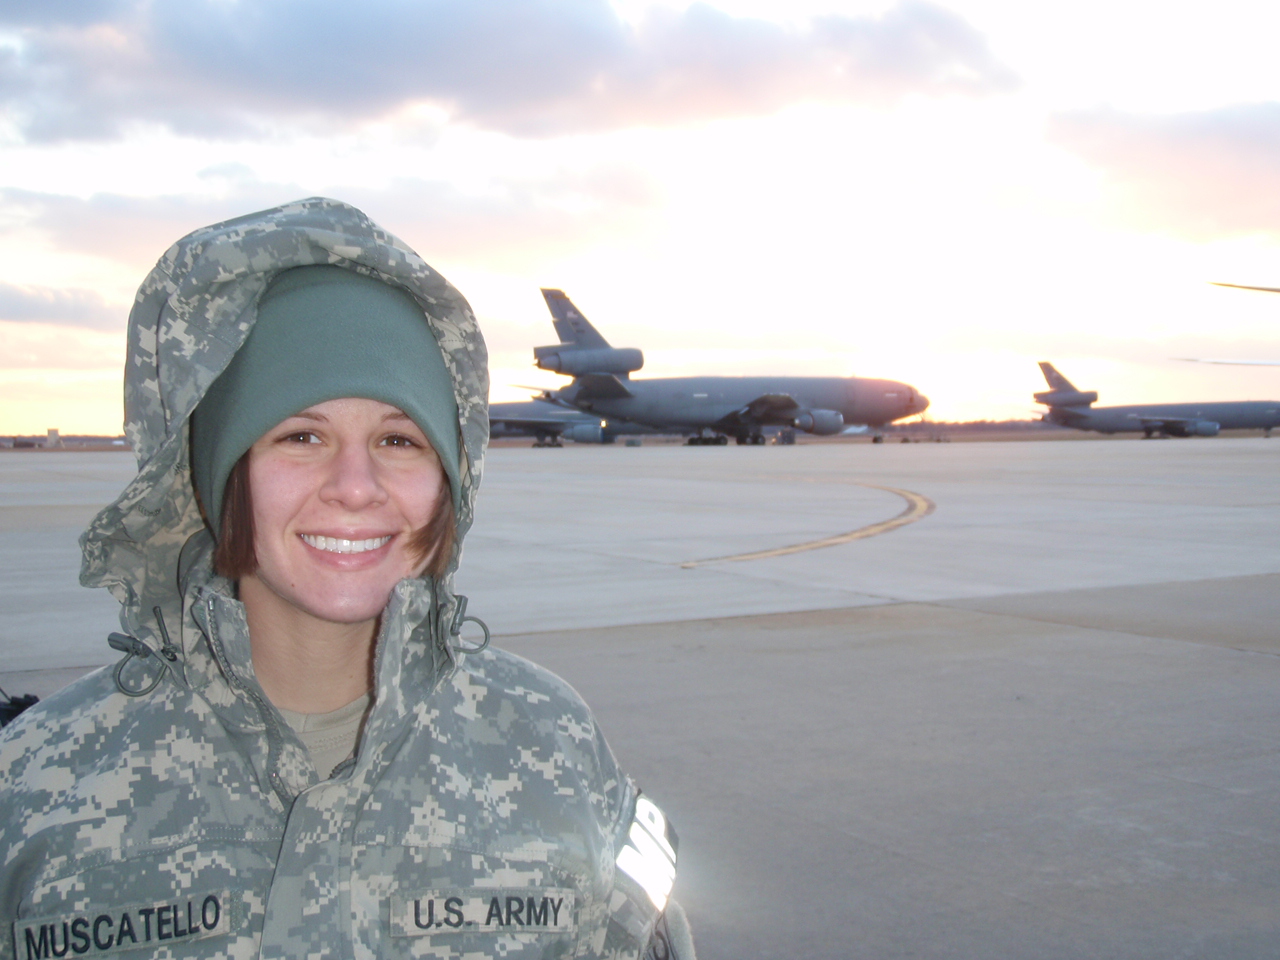 Crystal Muscatello Army National Guard 2006-2015.